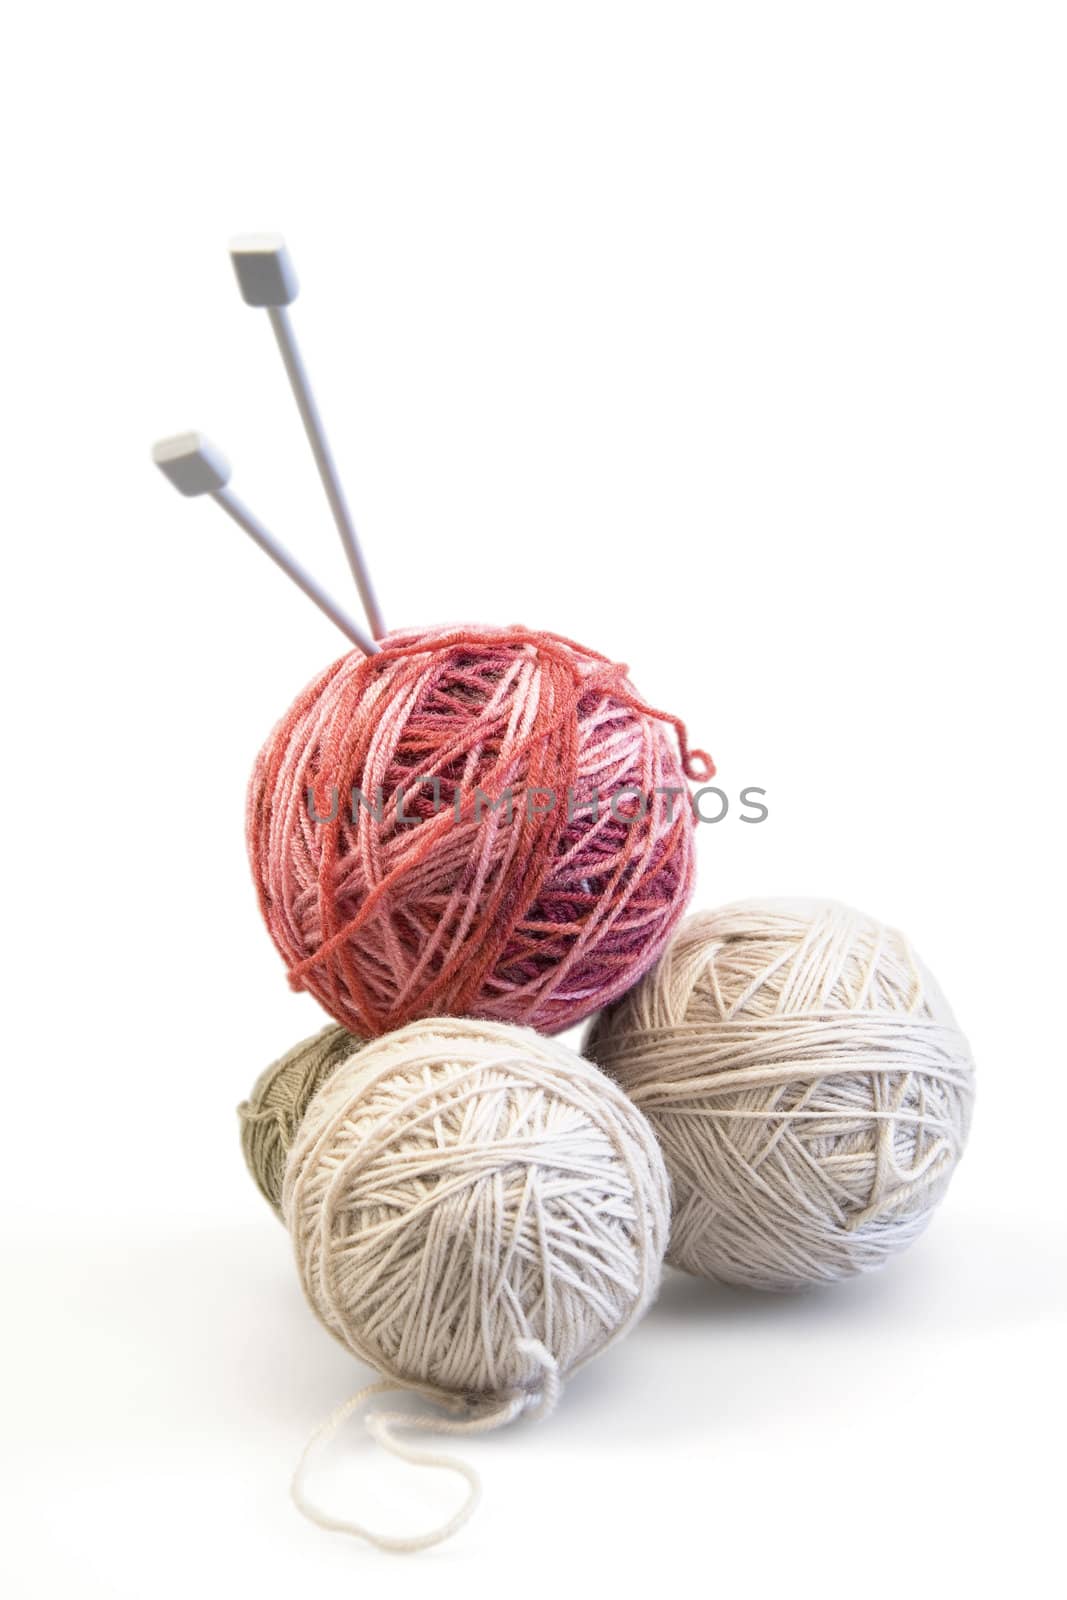 Spokes and color balls from wool on a white background